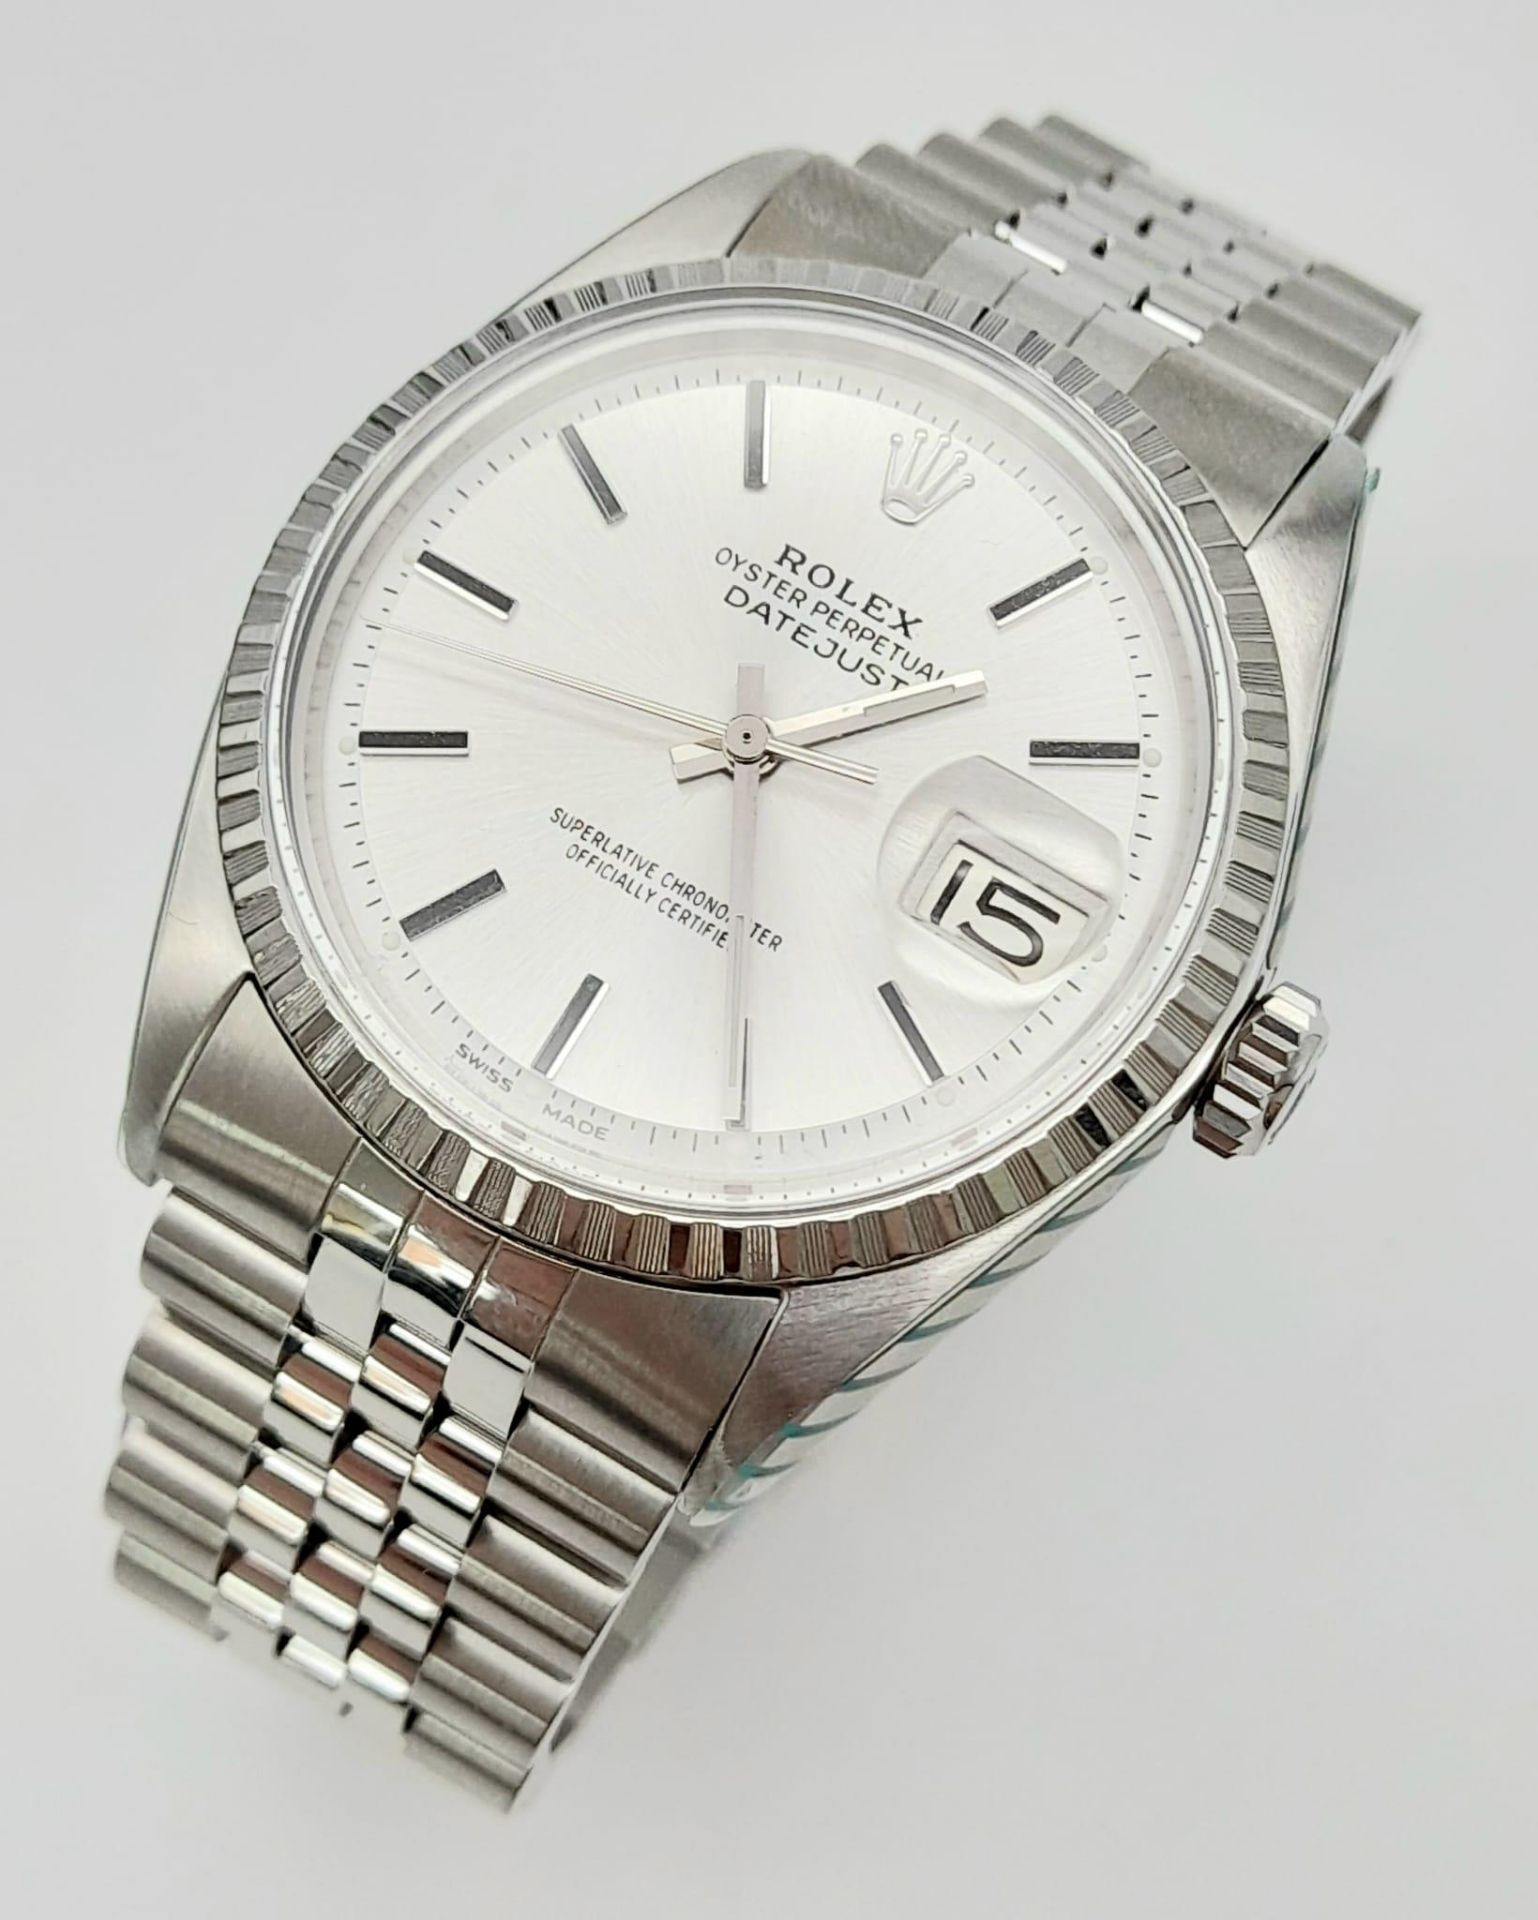 A 2007/8 Completely Overhauled Rolex Oyster Perpetual Datejust. All work completed by Rolex.